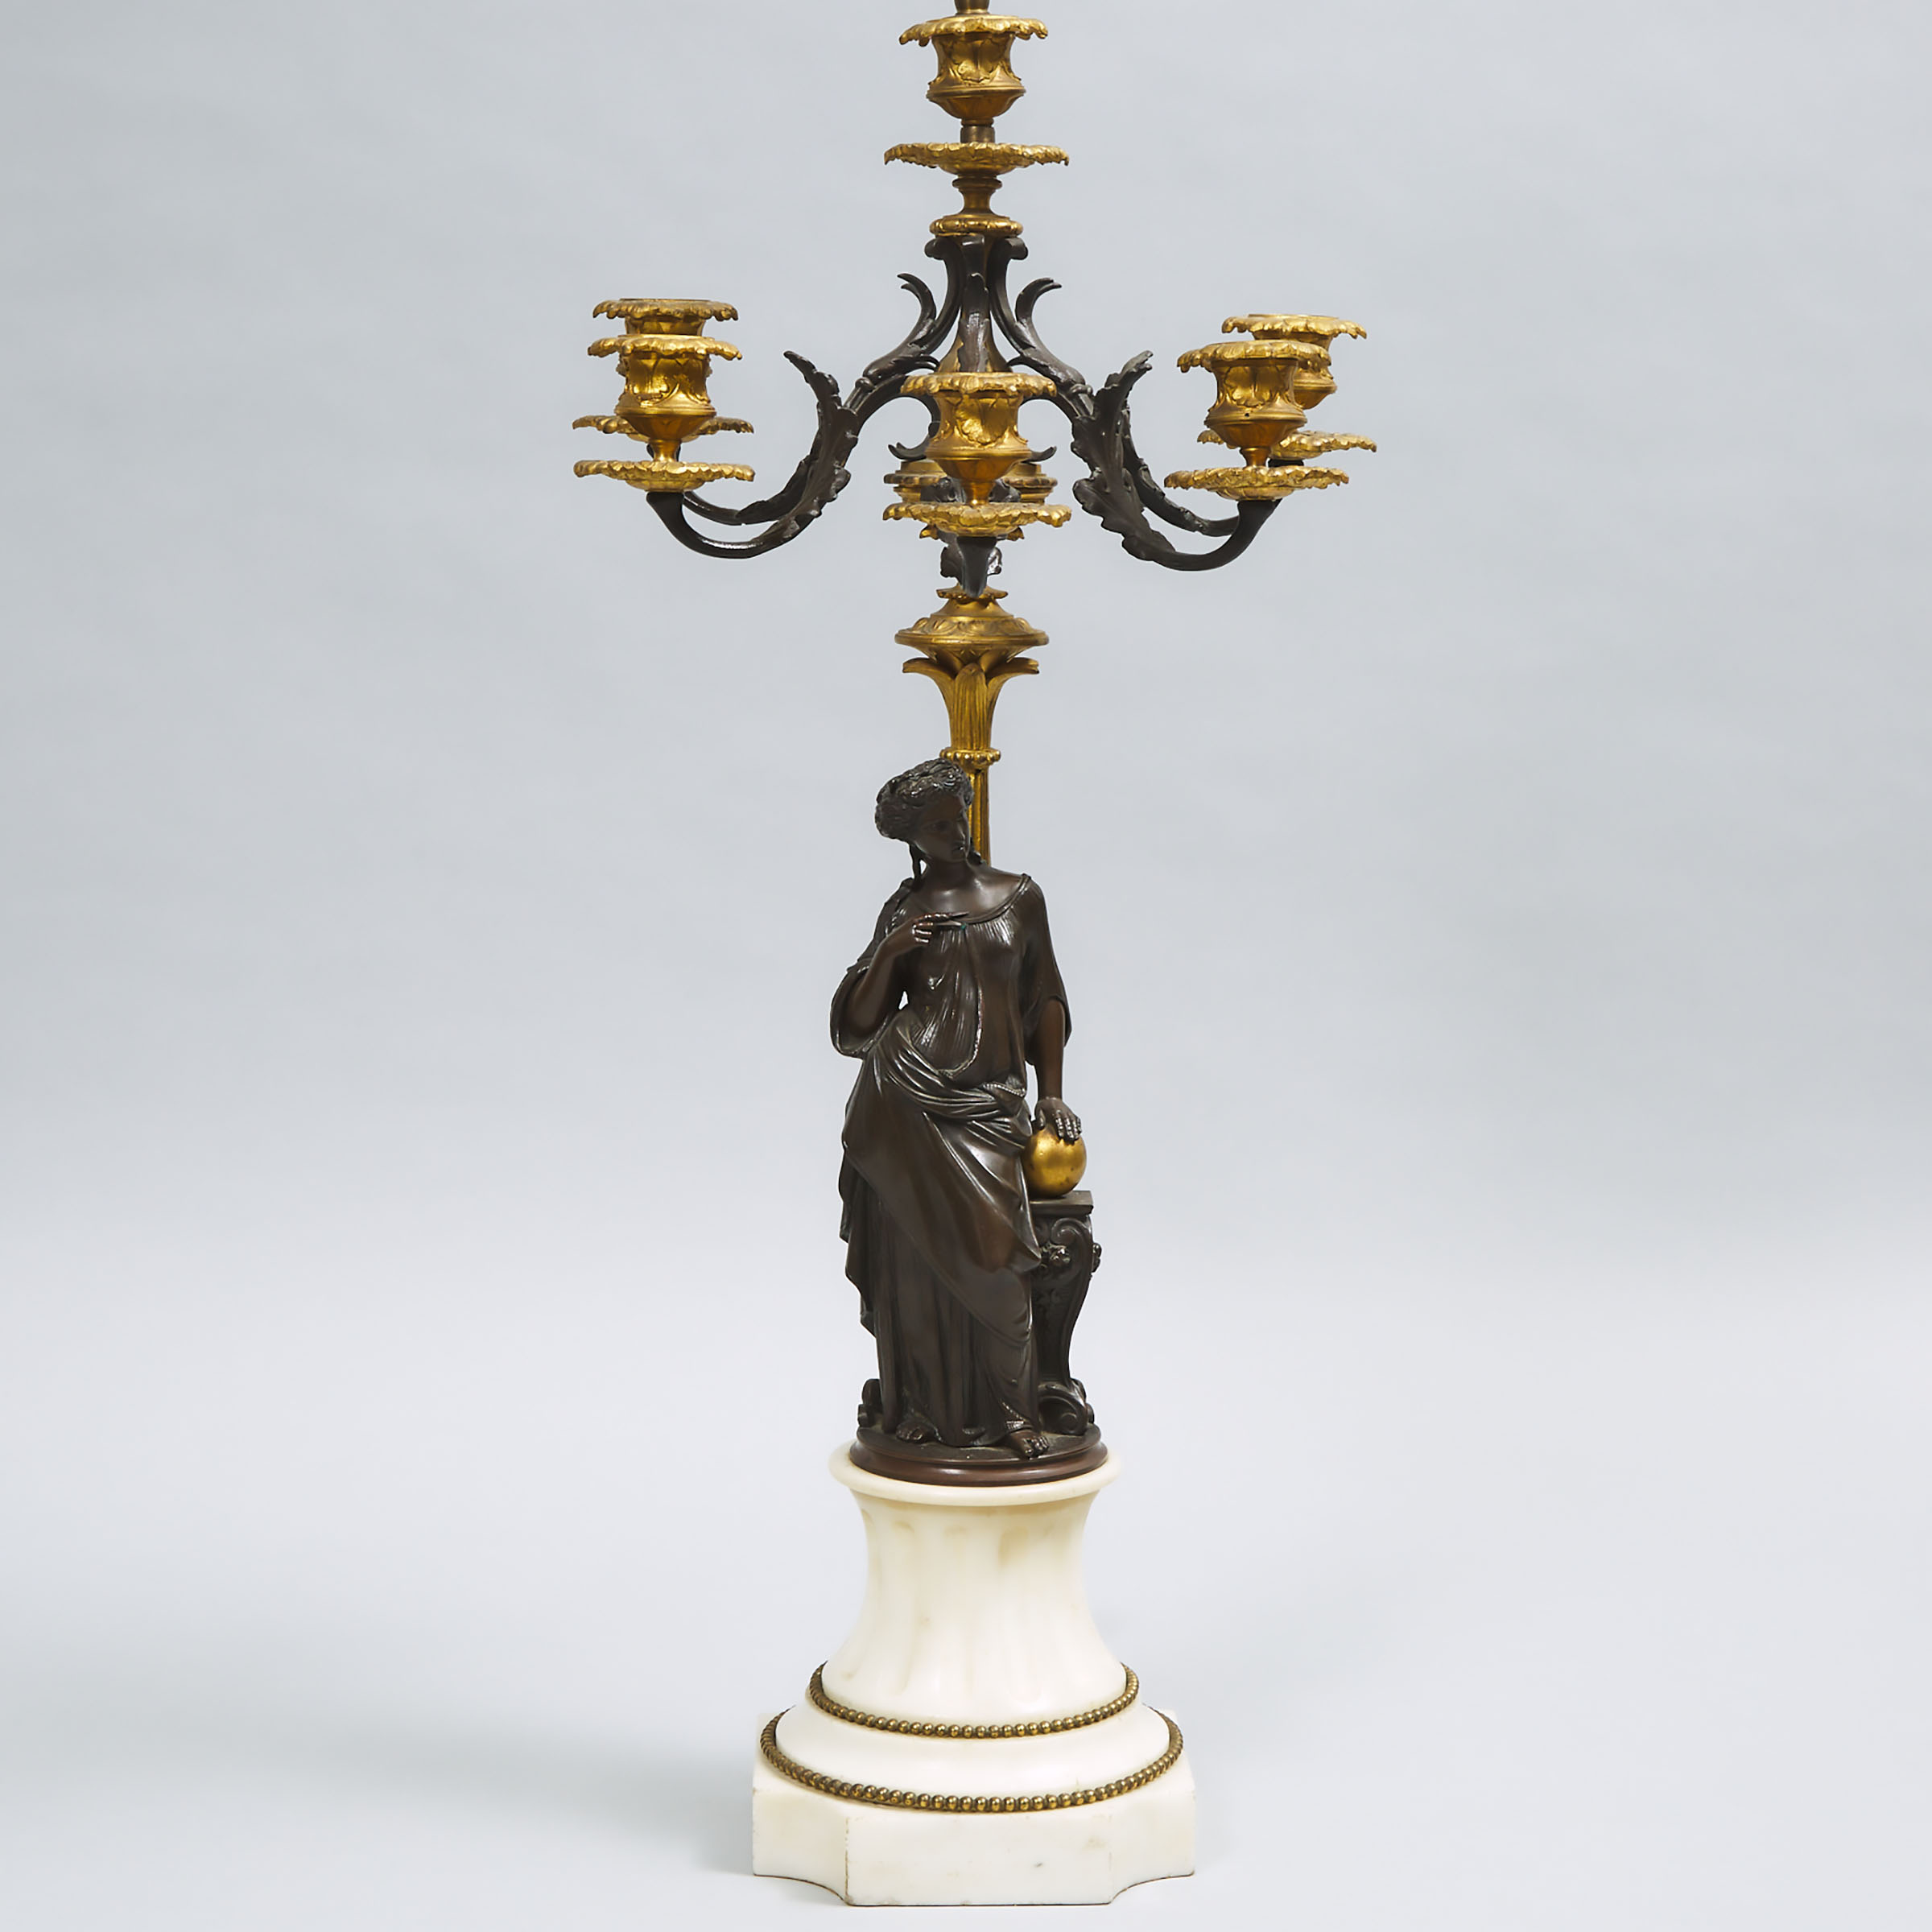 French Neoclassical Gilt and Patinated Bronze Figural Table Lamp, early 20th century